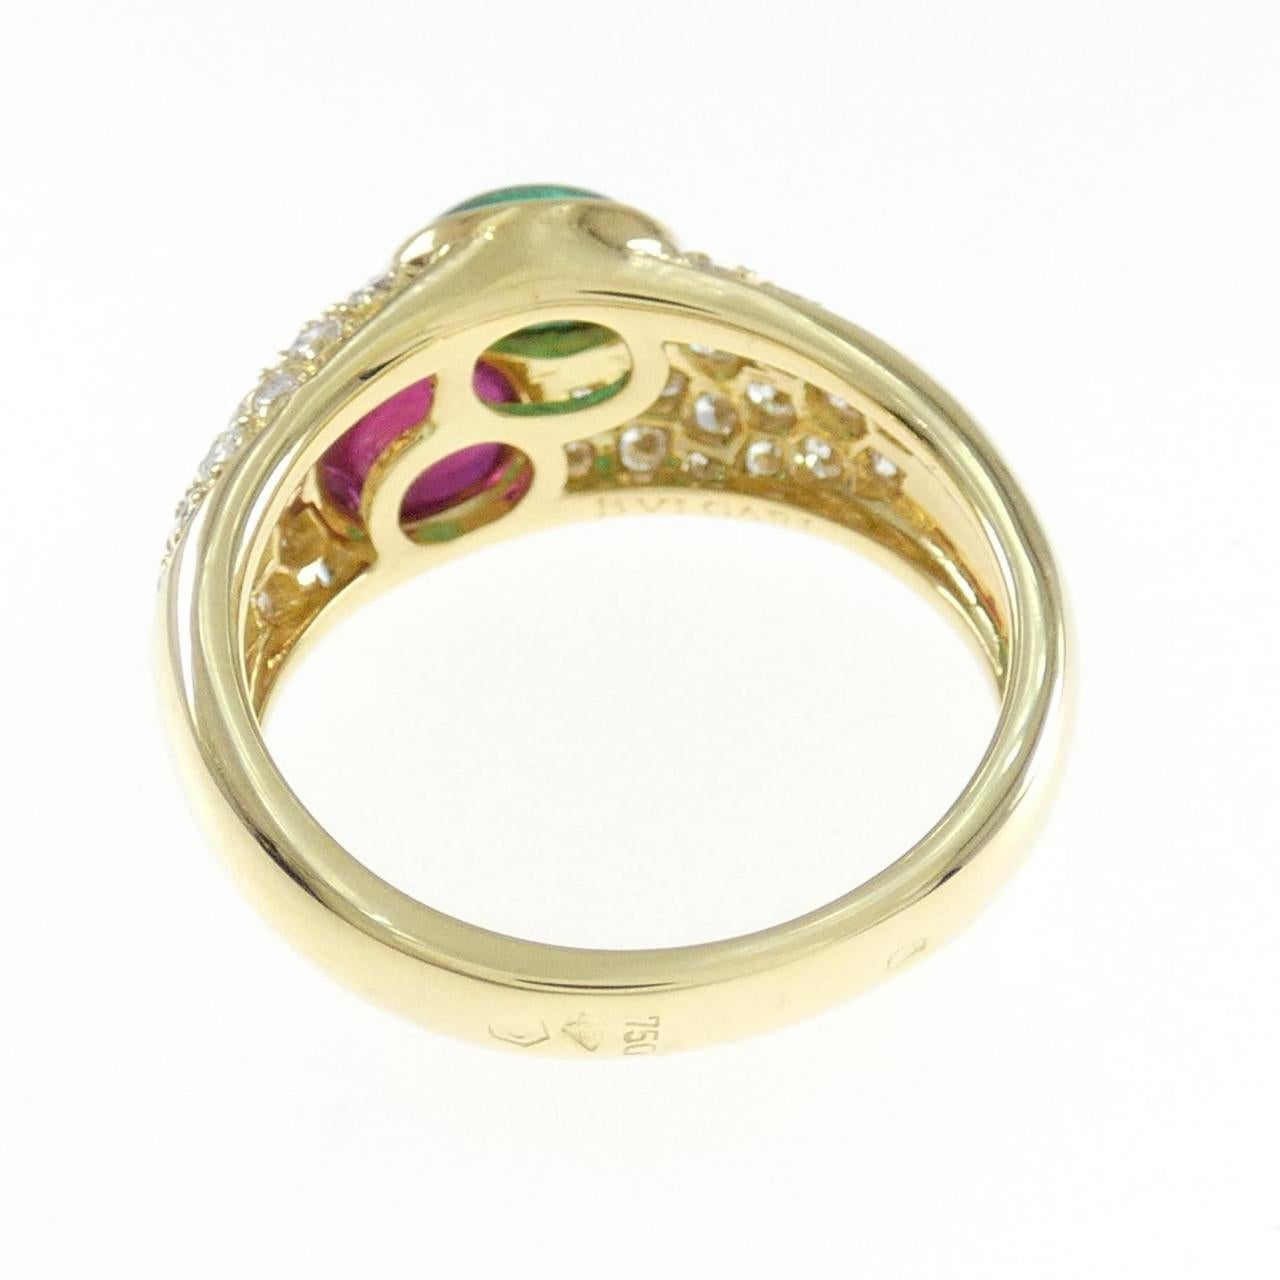 Round Cut Bvlgari Made in France 18k Yellow Gold, Diamond, Cabochon Emerald & Ruby Ring